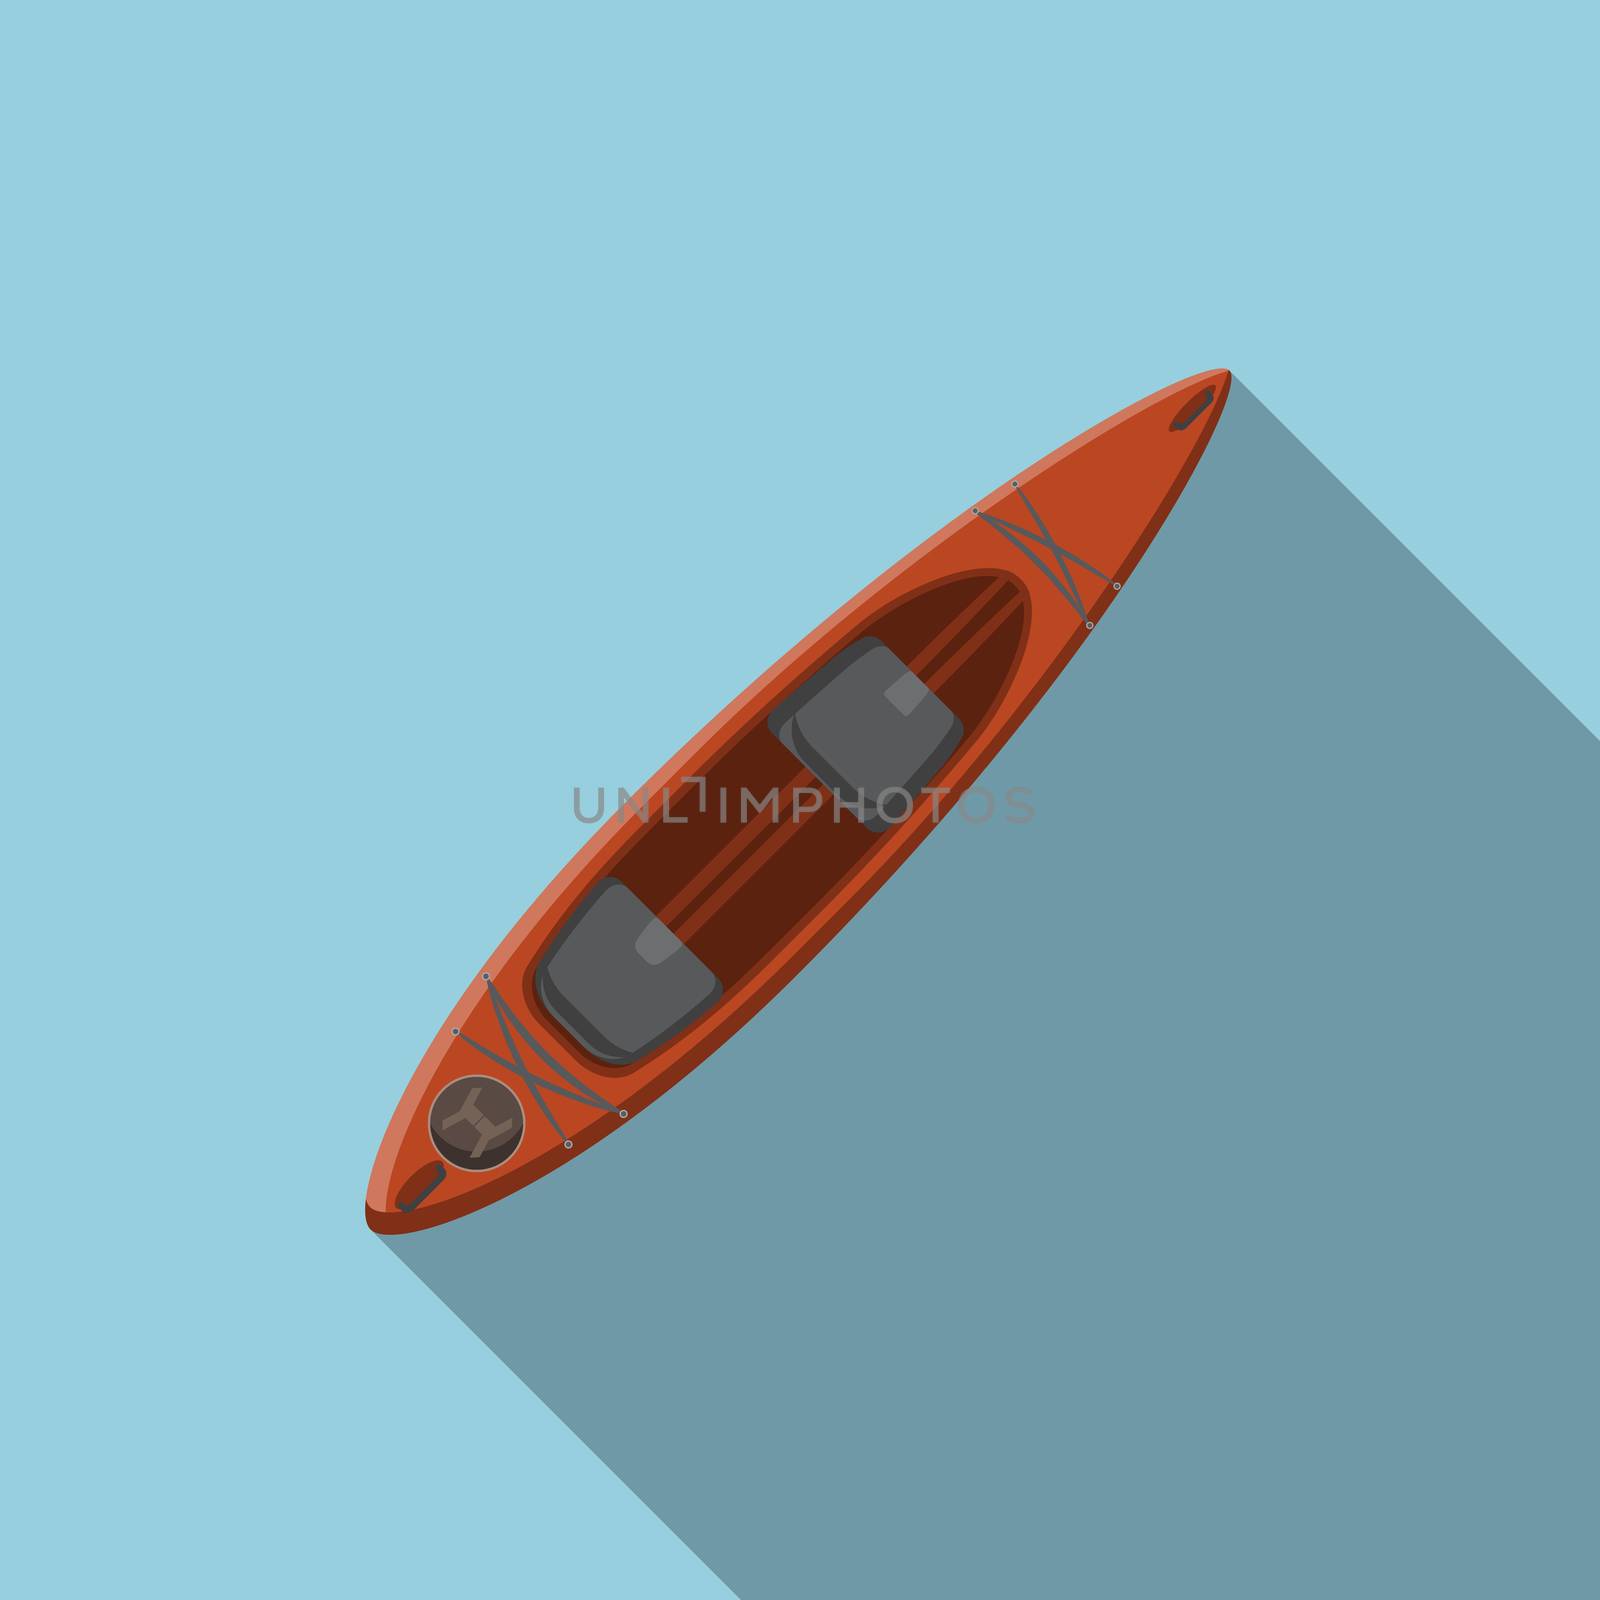 Flat design modern vector illustration of kayak icon, camping, hiking and extreme sports equipment with long shadow by Lemon_workshop